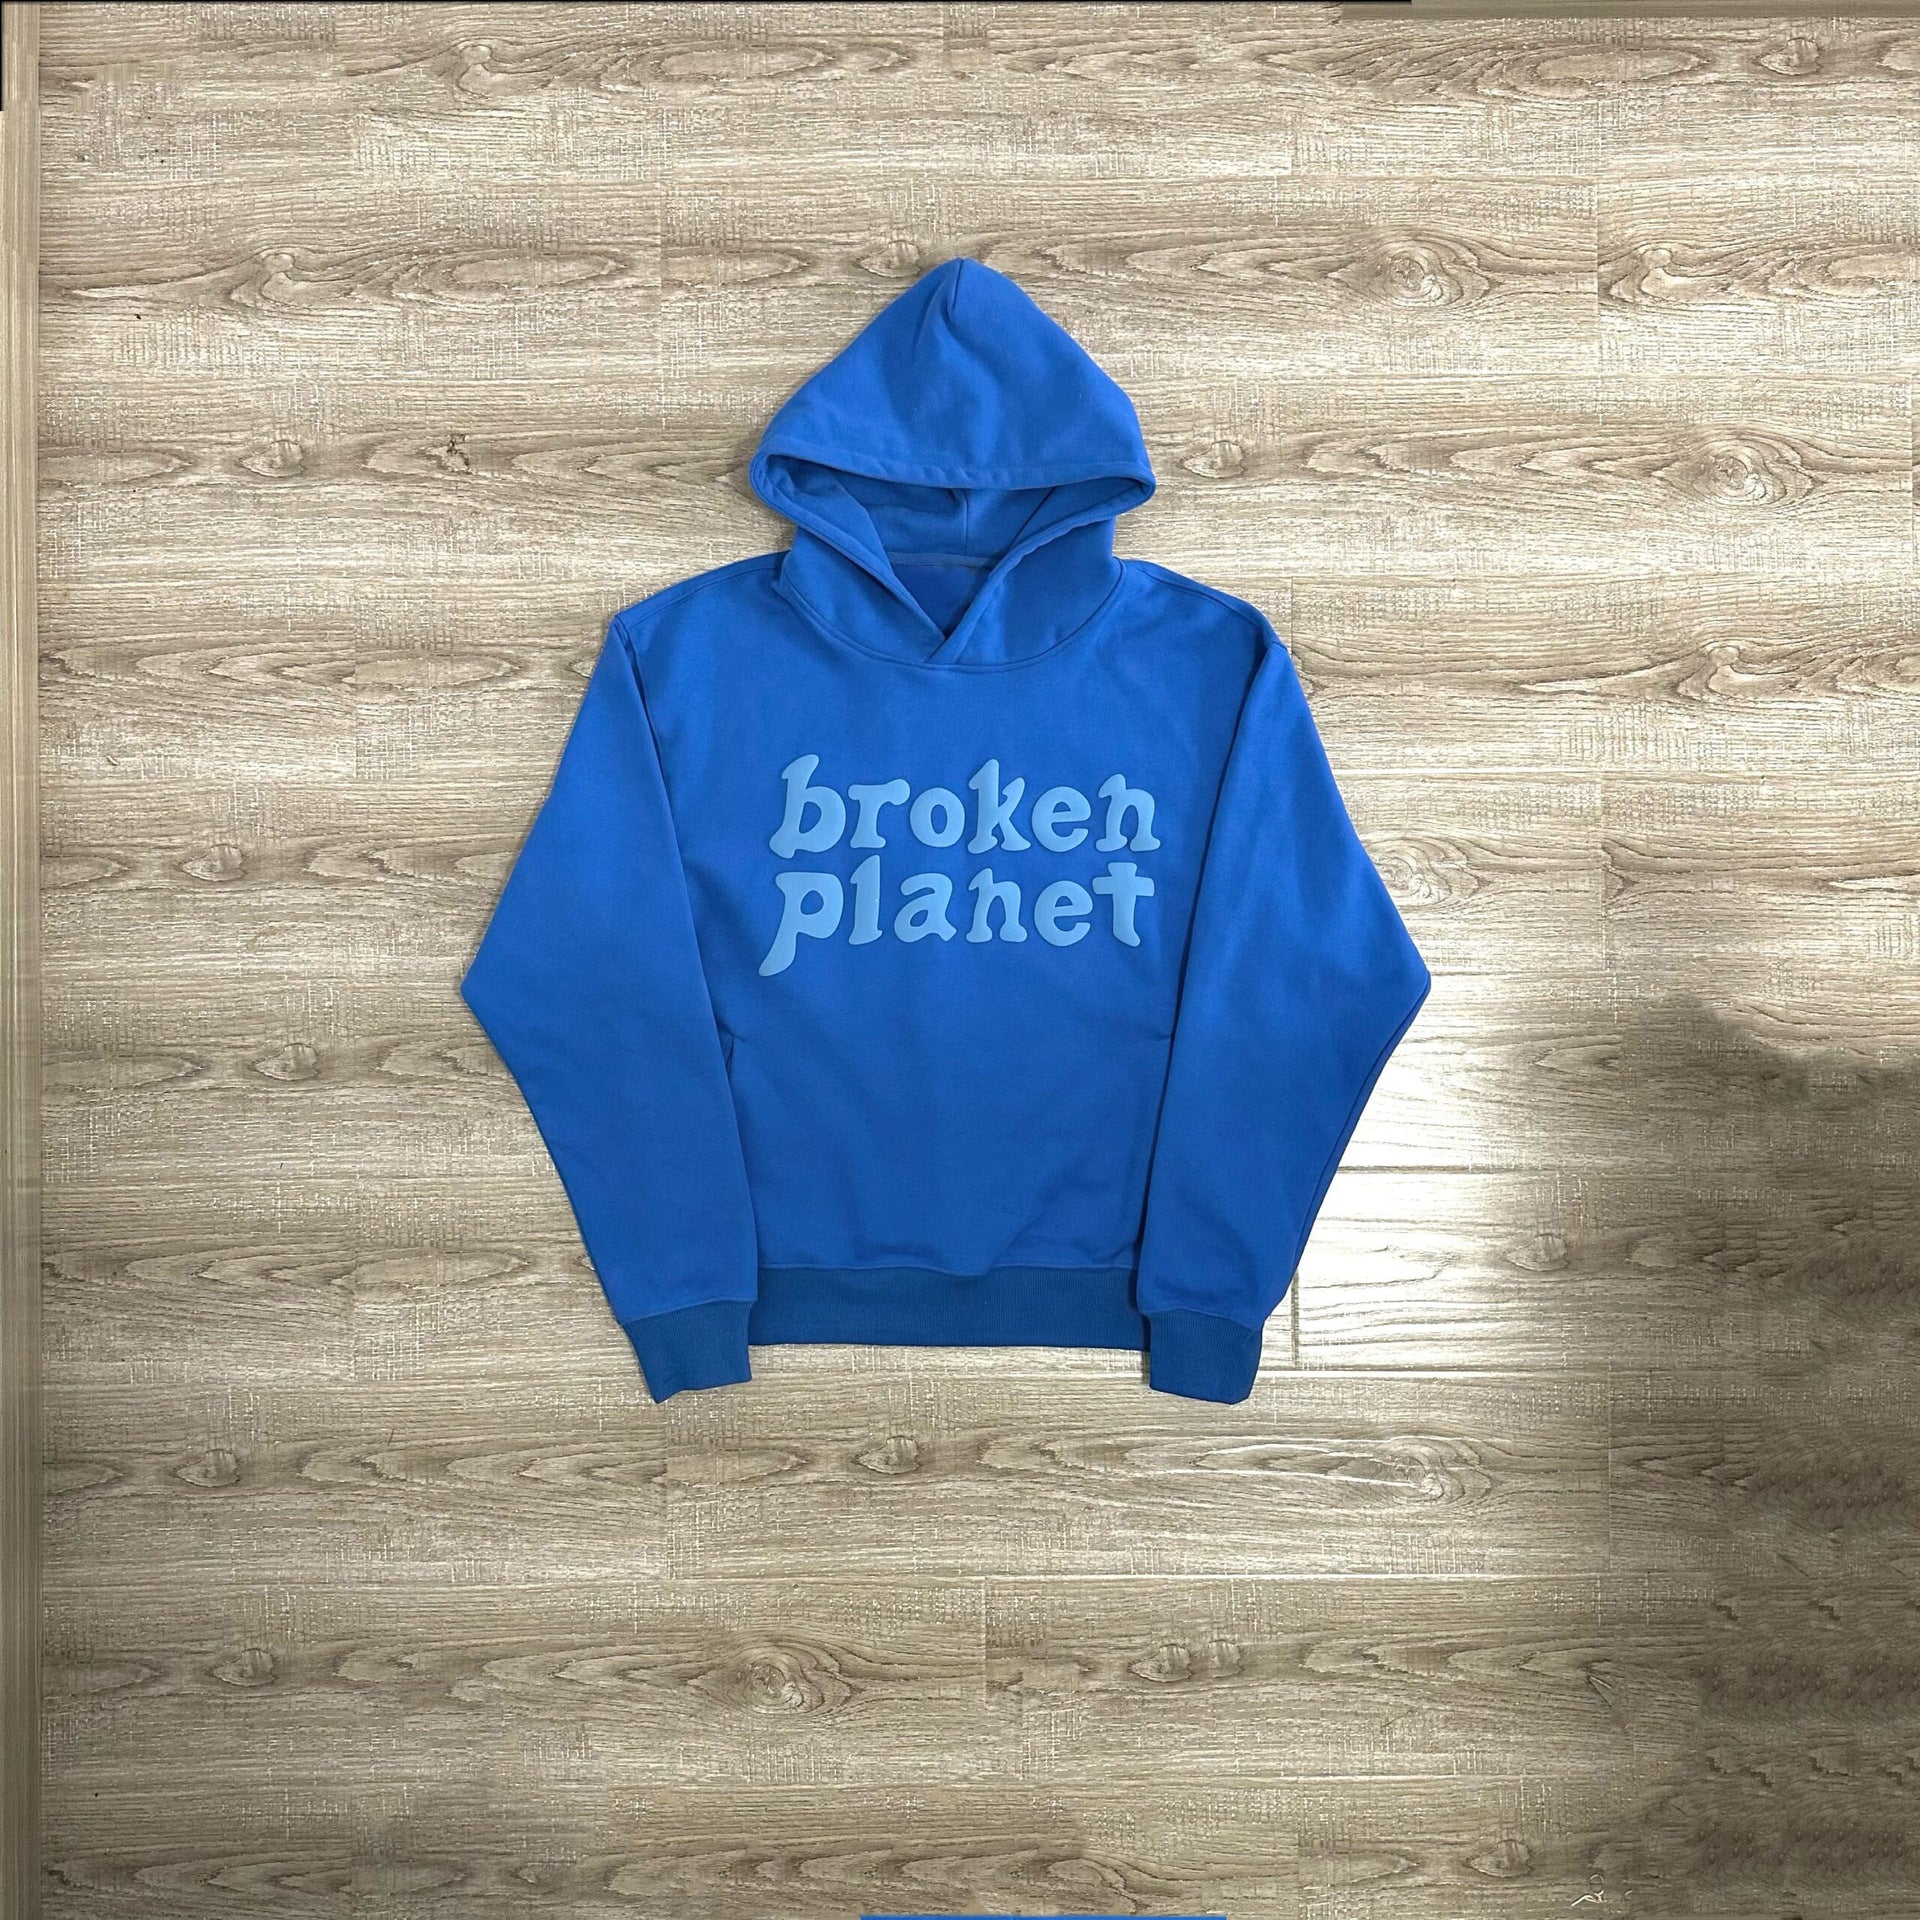 A blue polyester Maramalive™ Letter Foam Printed Hoodie Punk Rock Casual Sweater with the words "broken planet" written in white, laid flat on a wooden floor, perfect for any street hipster.